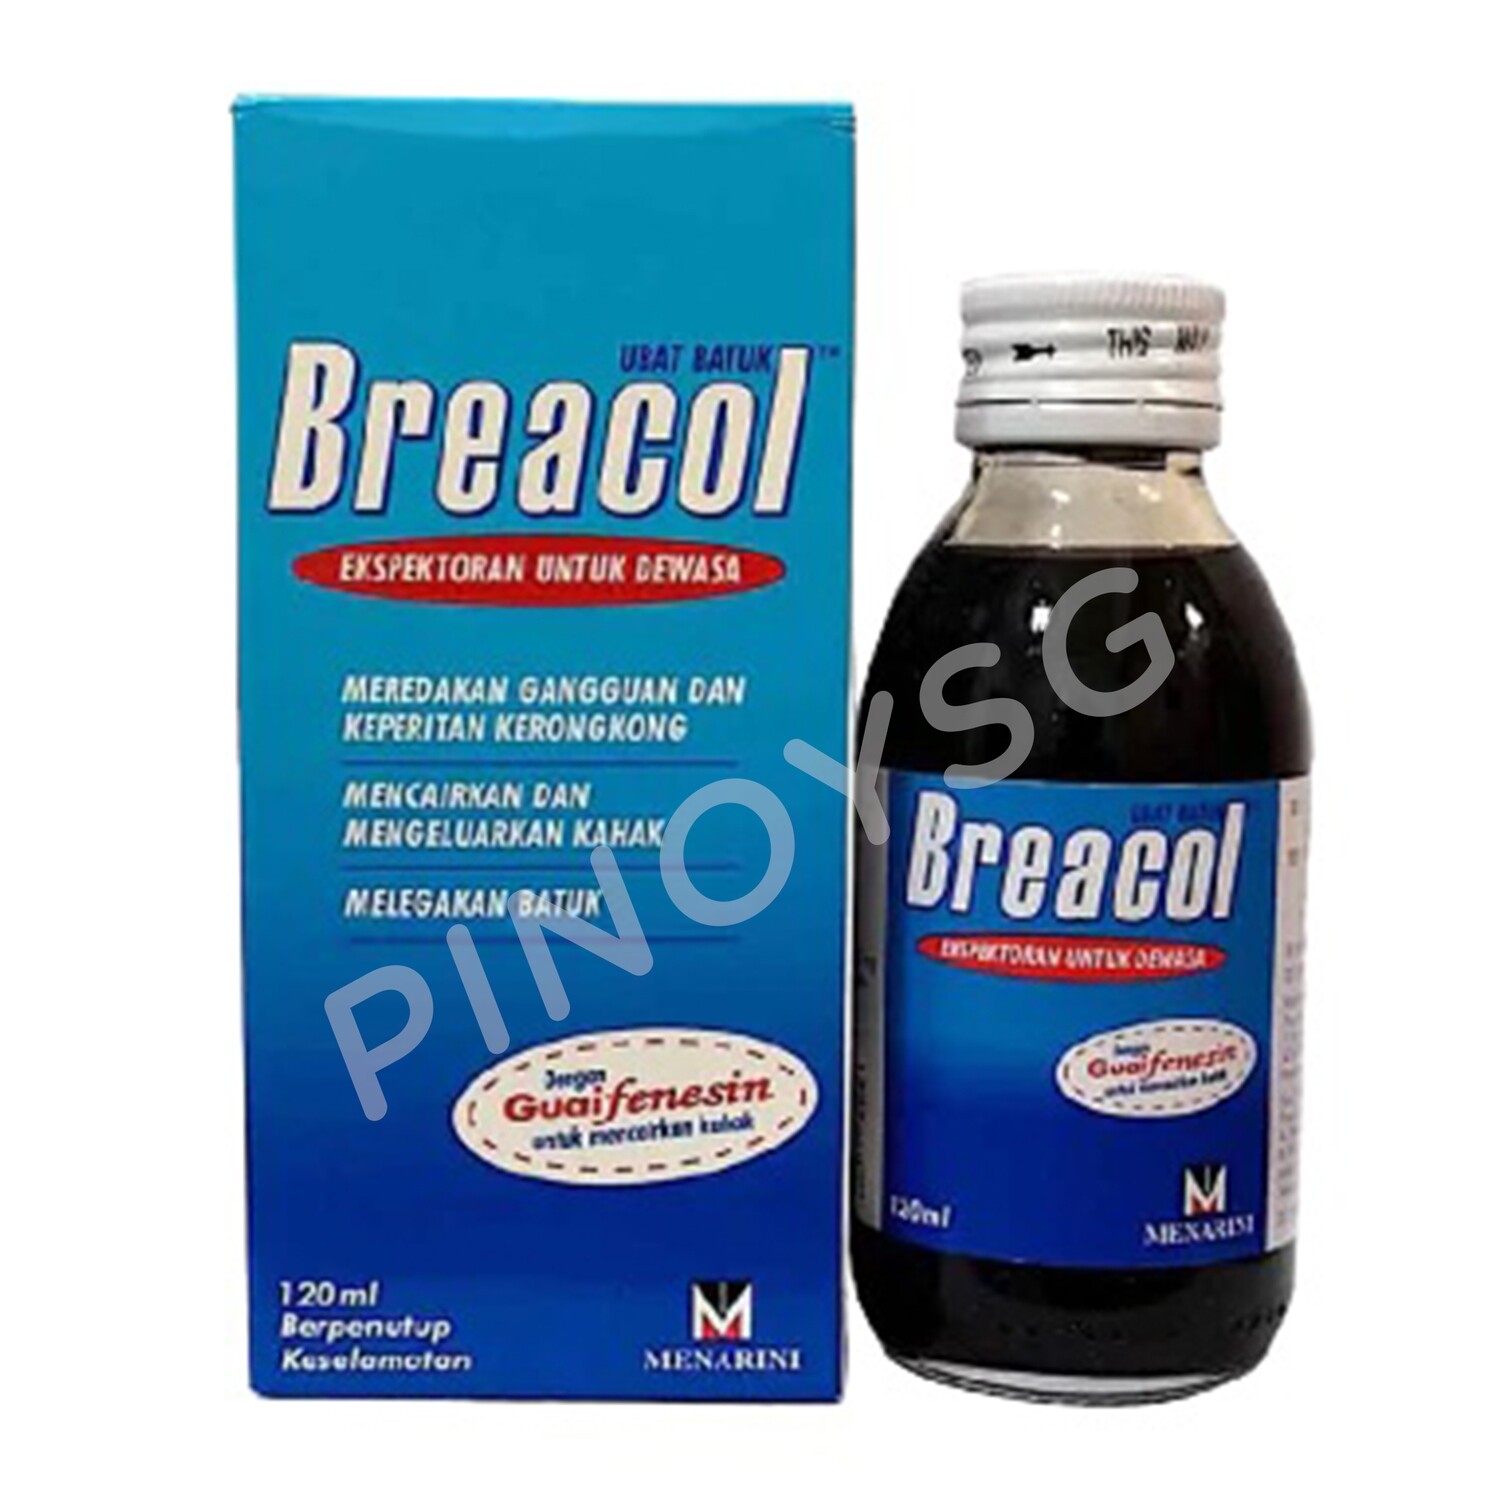 Breacol Cough Syrup 120ml